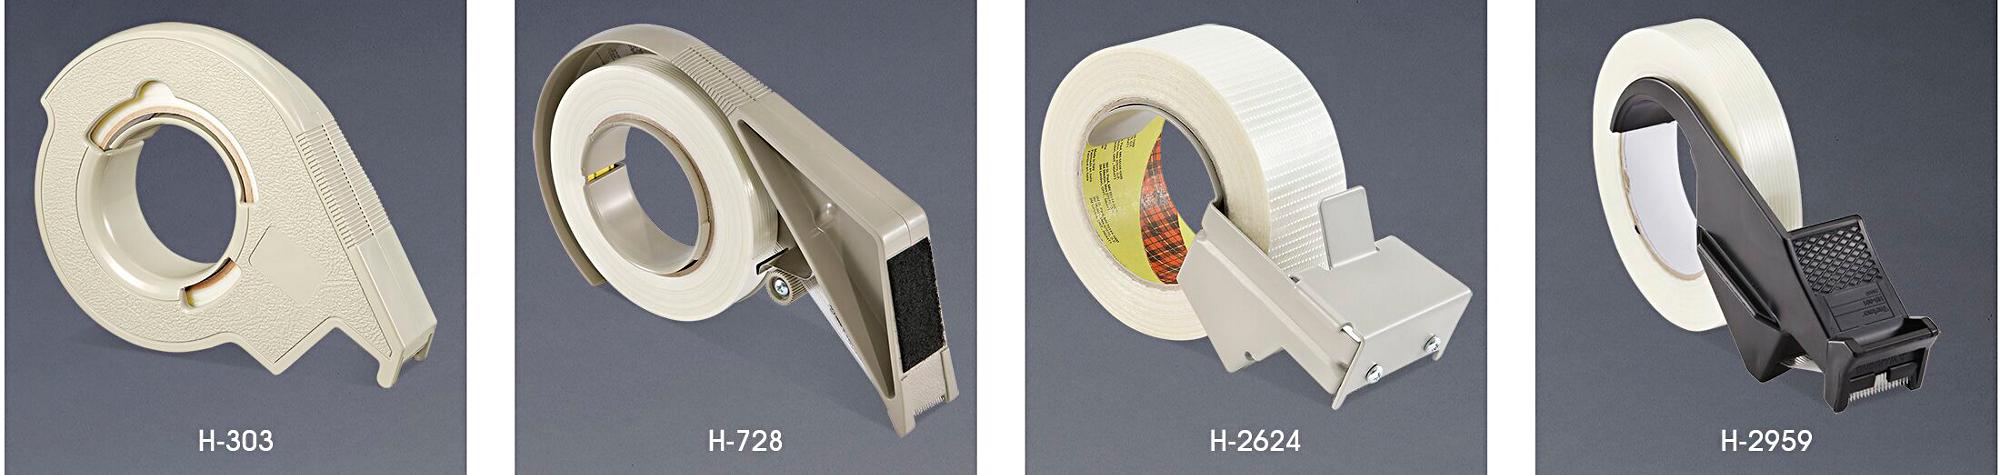 3M Strapping Tape Dispensers